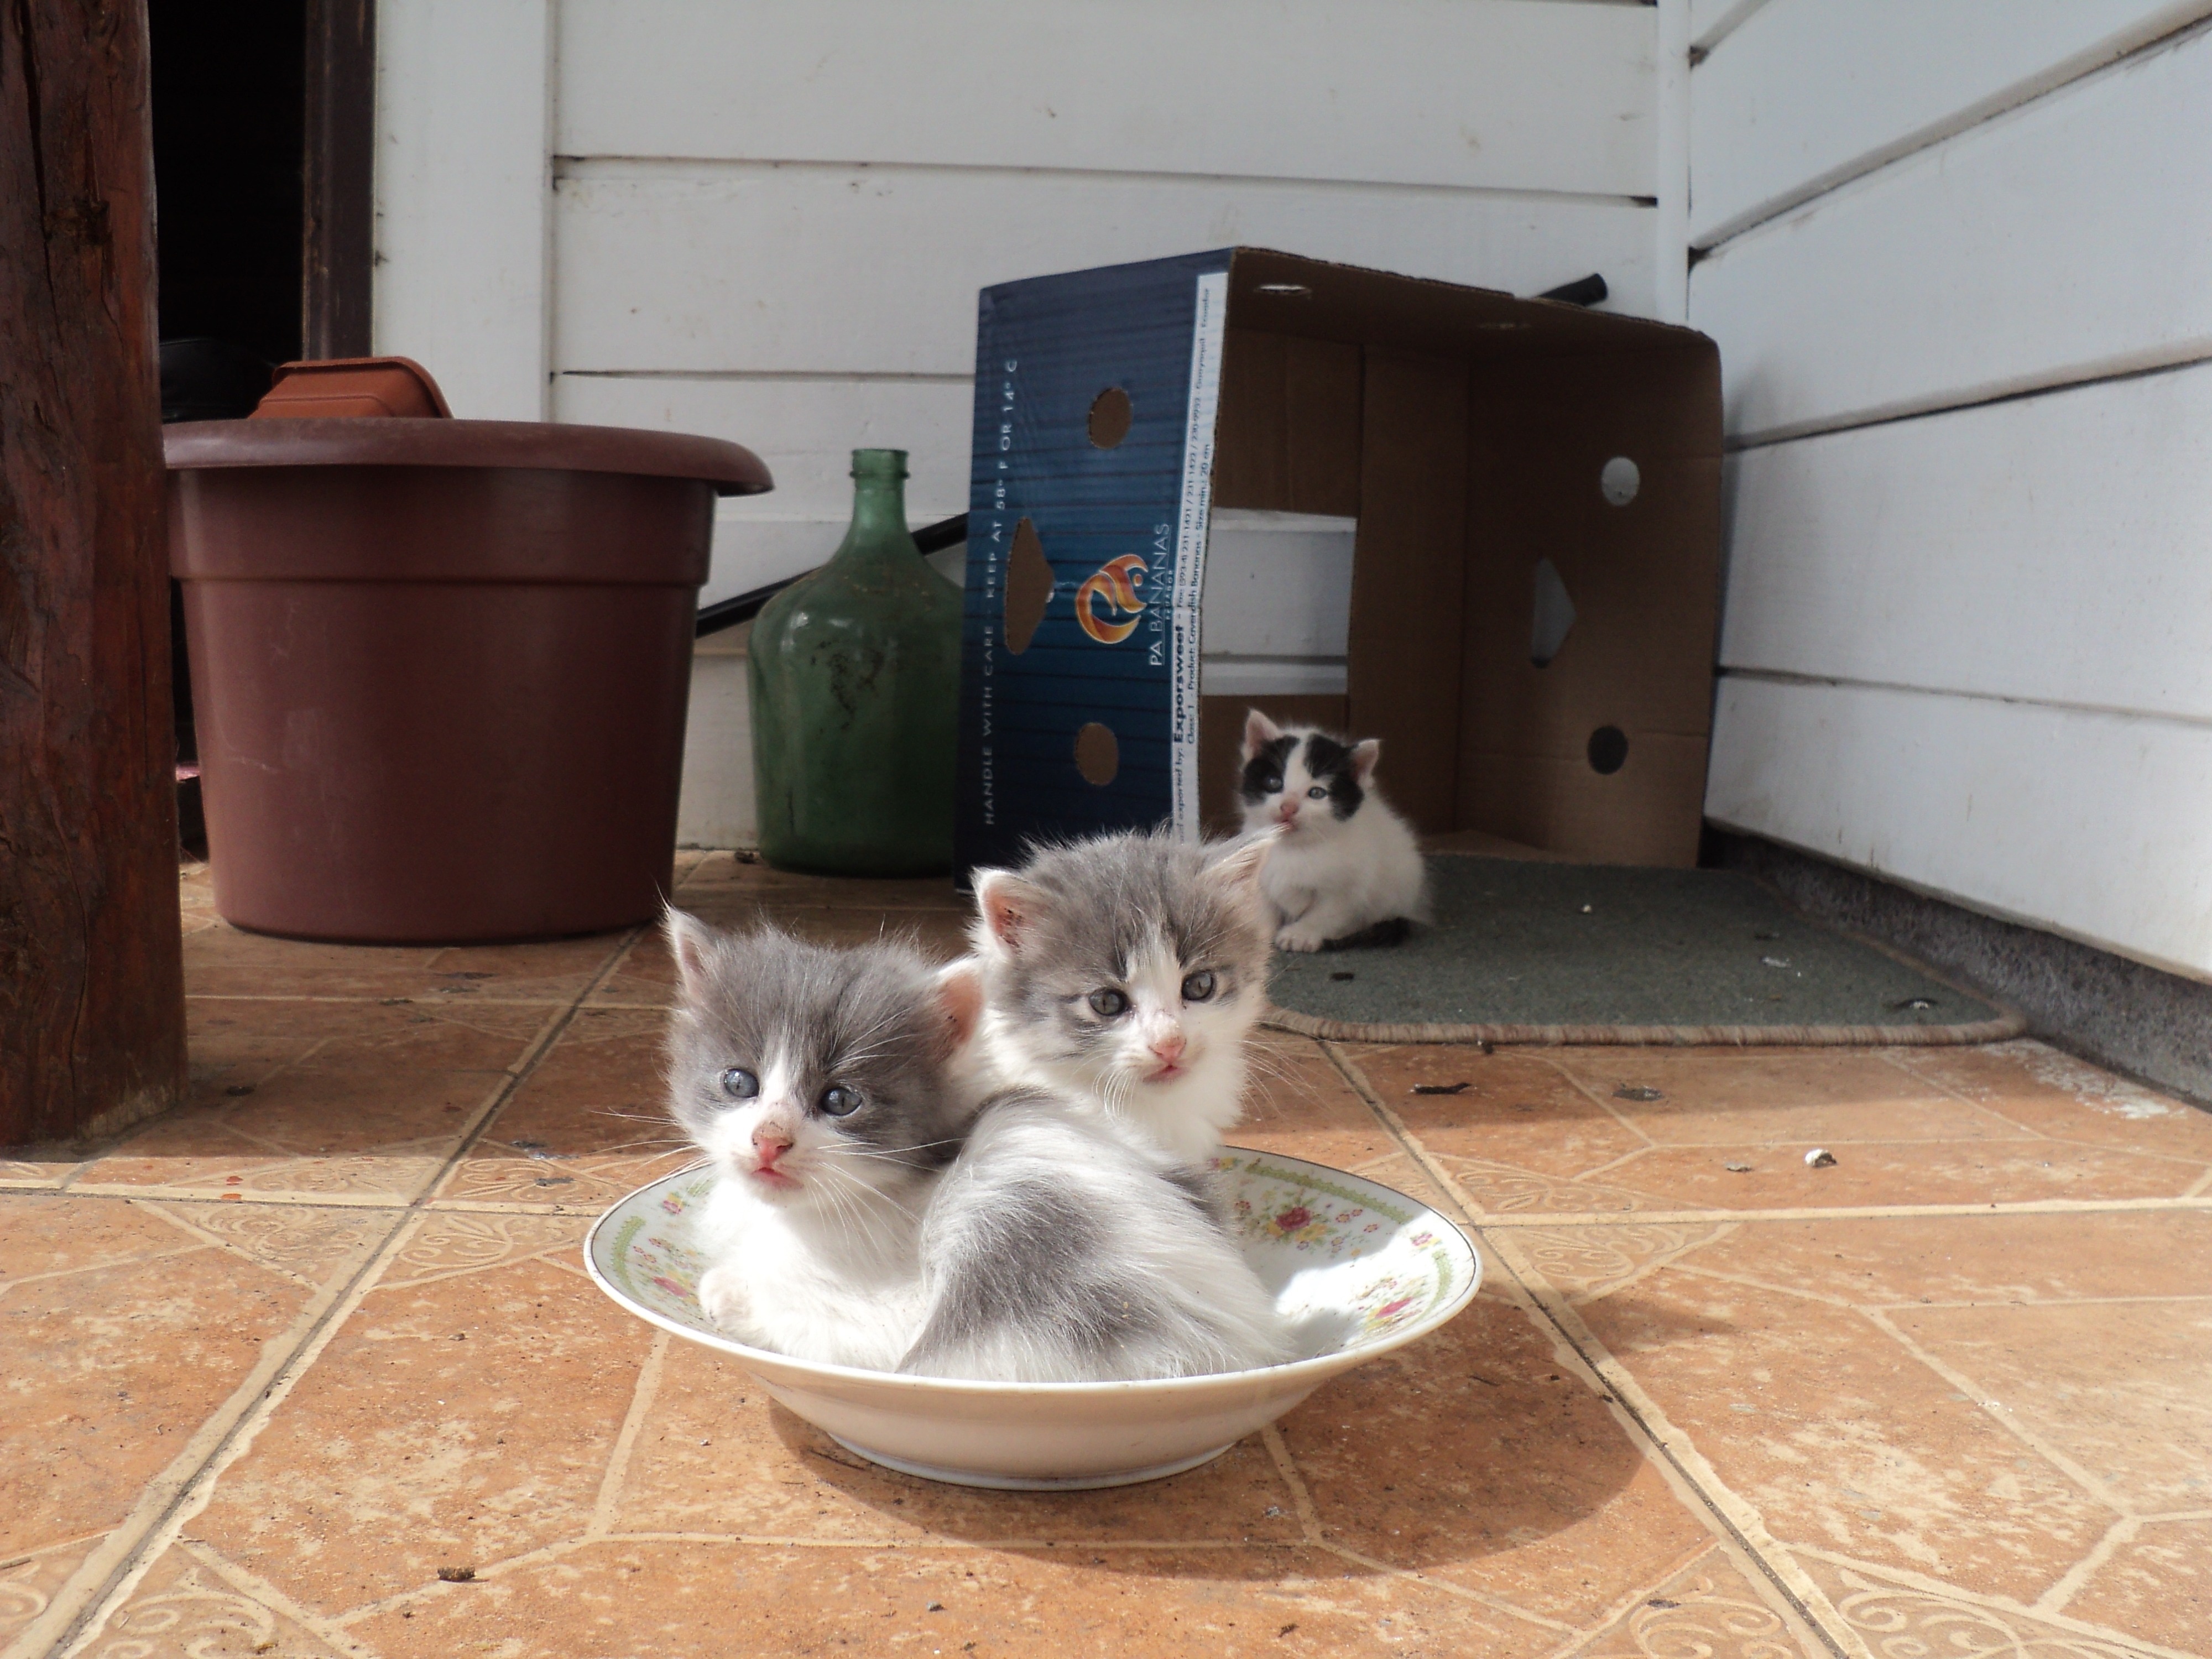 3 white and gray fur kittens